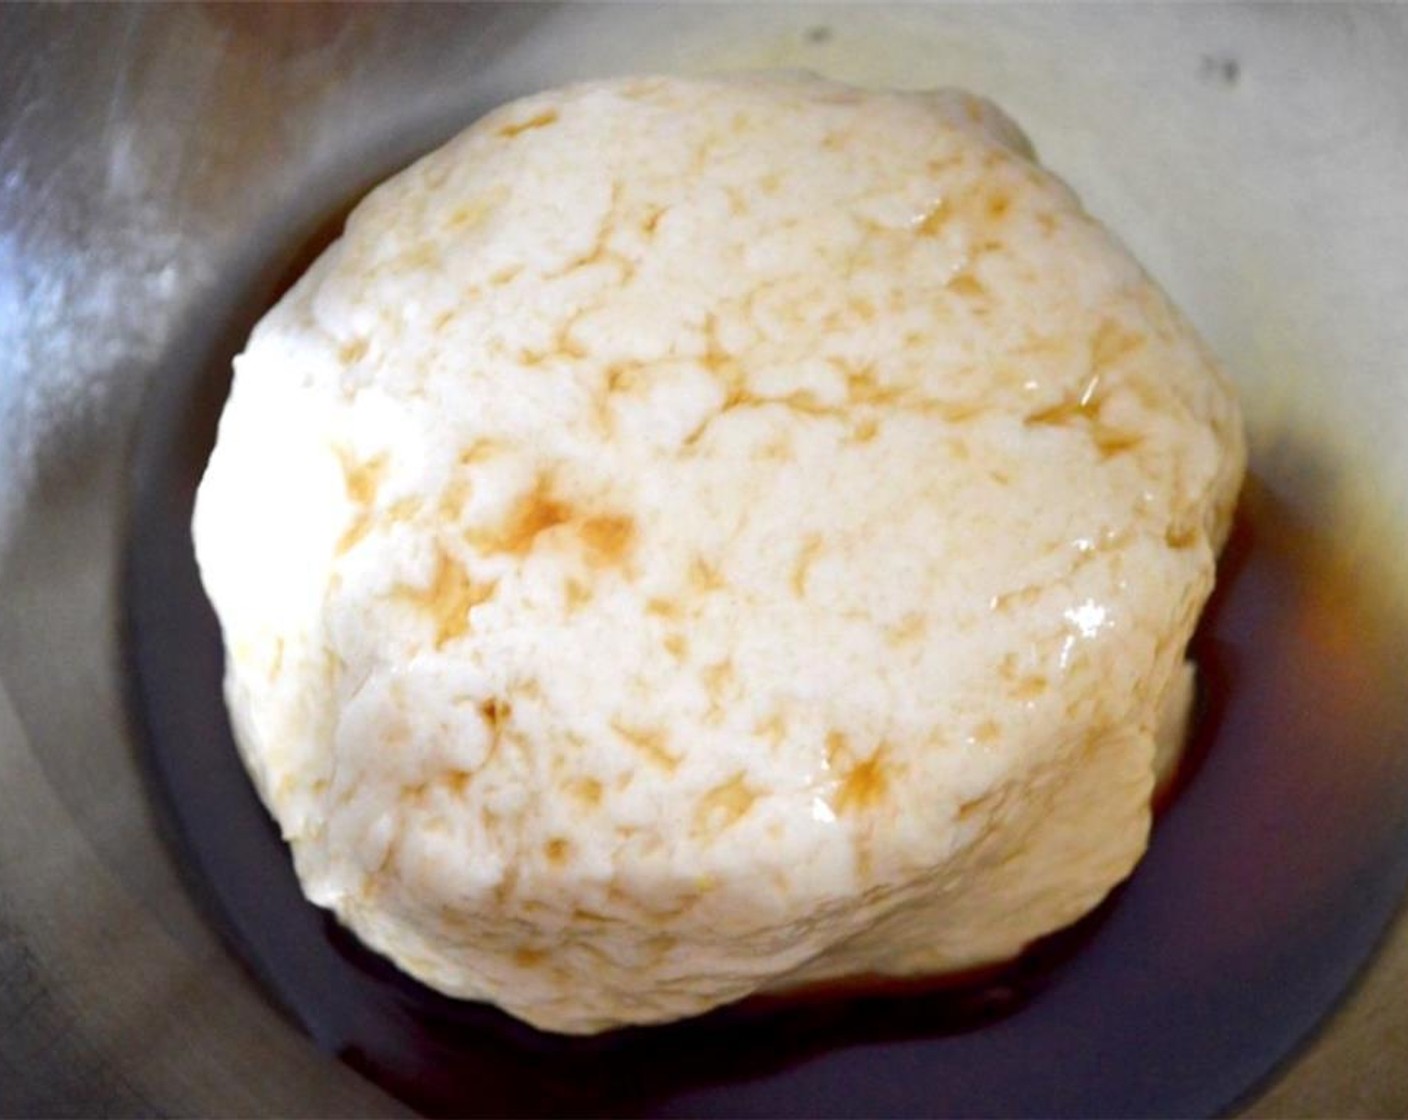 step 4 Transfer the ball of dough to a bowl and pour the Sesame Oil (2 Tbsp) over it. Make sure it is all coated in the sesame oil, then cover it and let it rest for an hour.